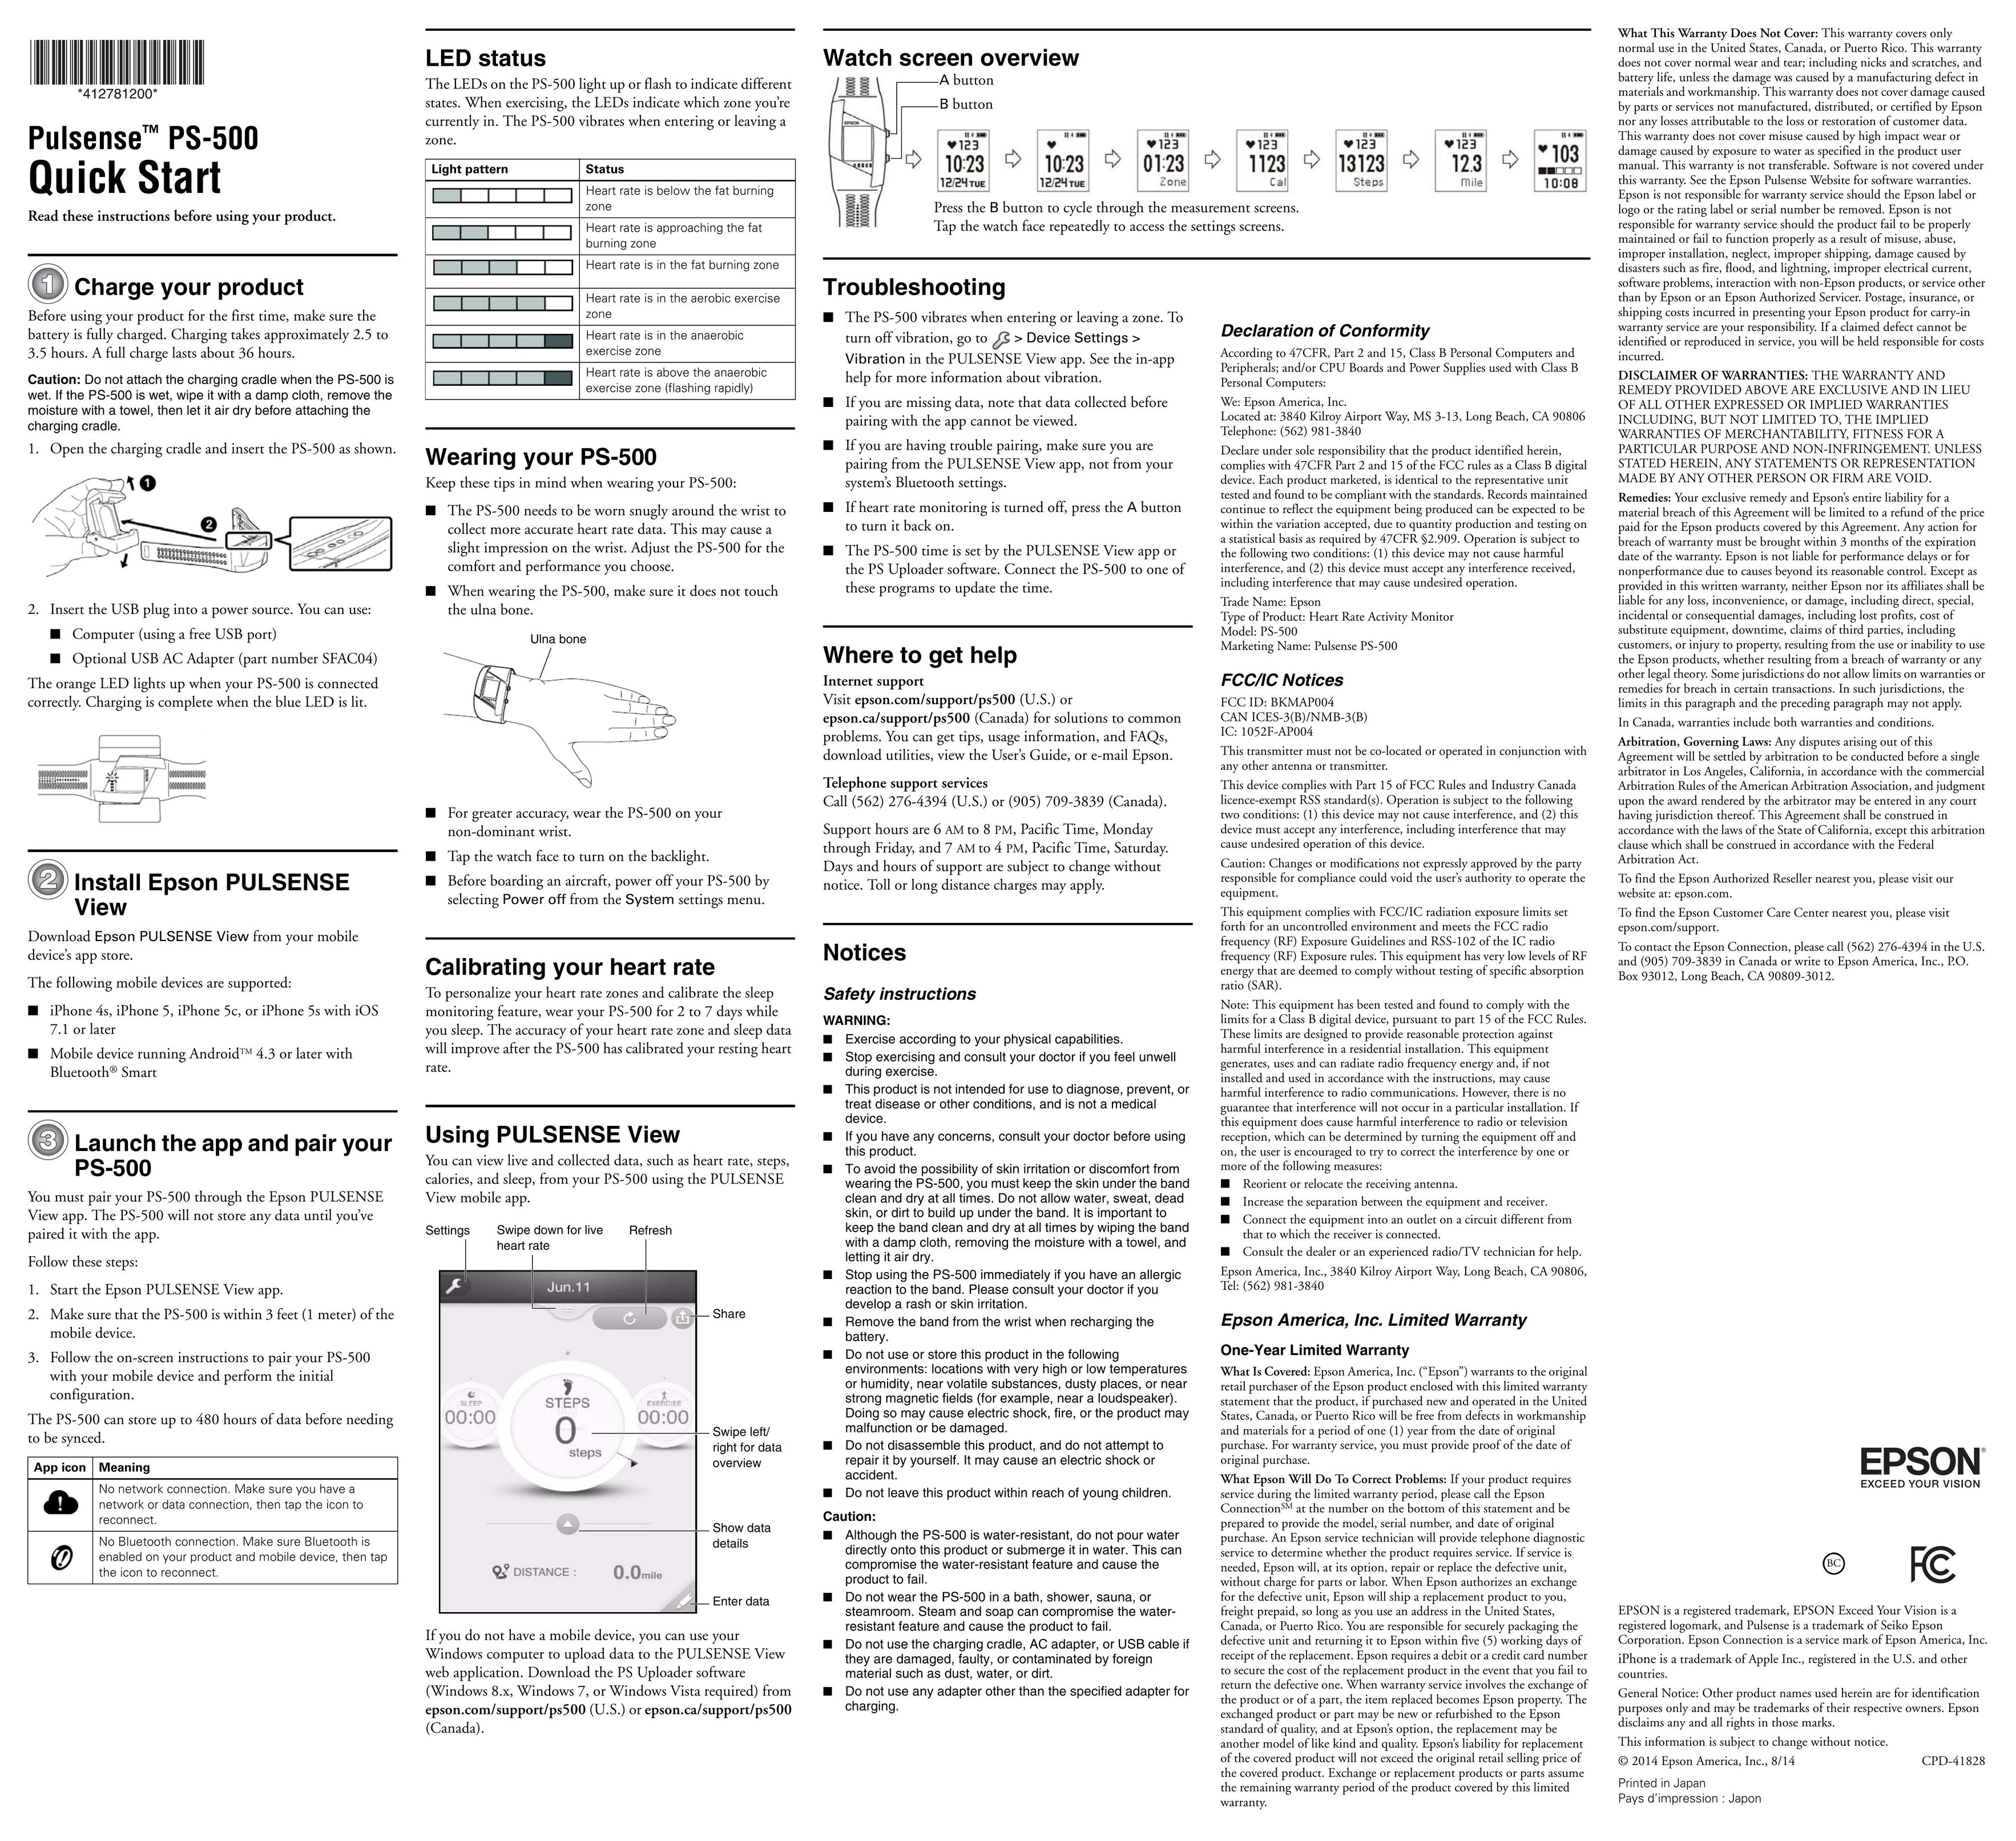 Epson PS-500 Heart Rate Monitor User Manual